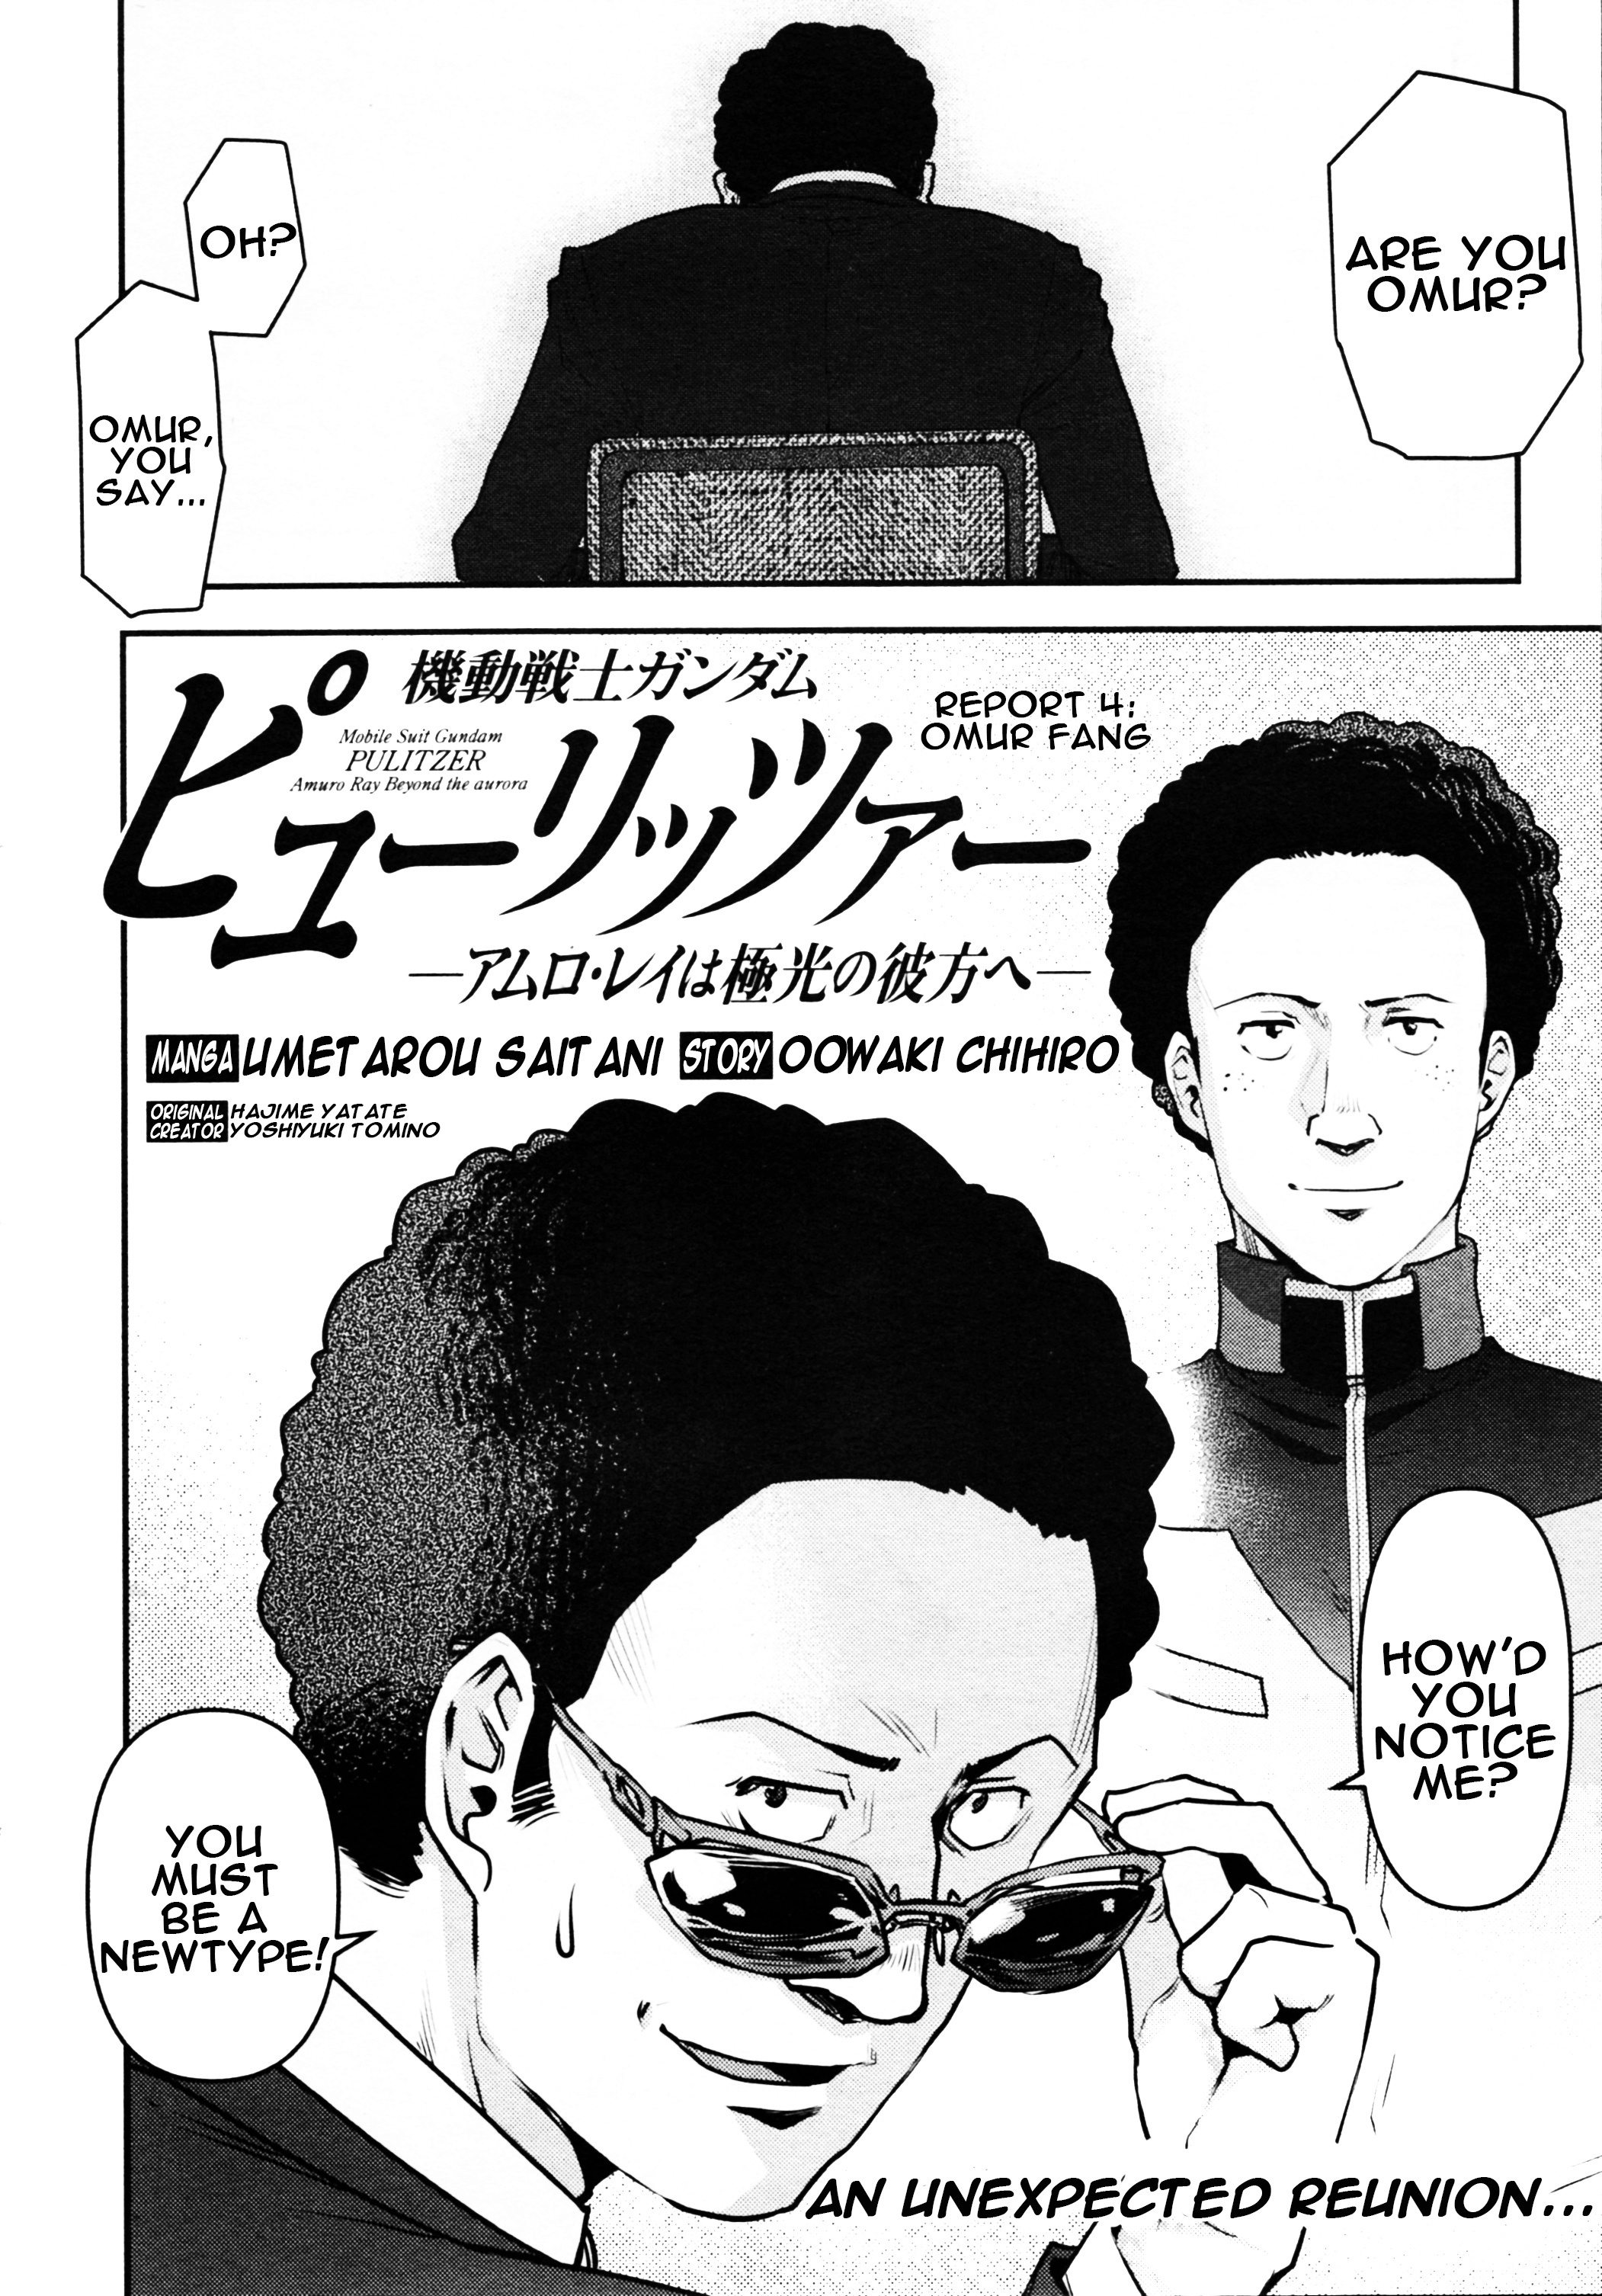 Mobile Suit Gundam Pulitzer - Amuro Ray Beyond The Aurora Vol.1 Chapter 4: Report 4: Omur Fang - Picture 2